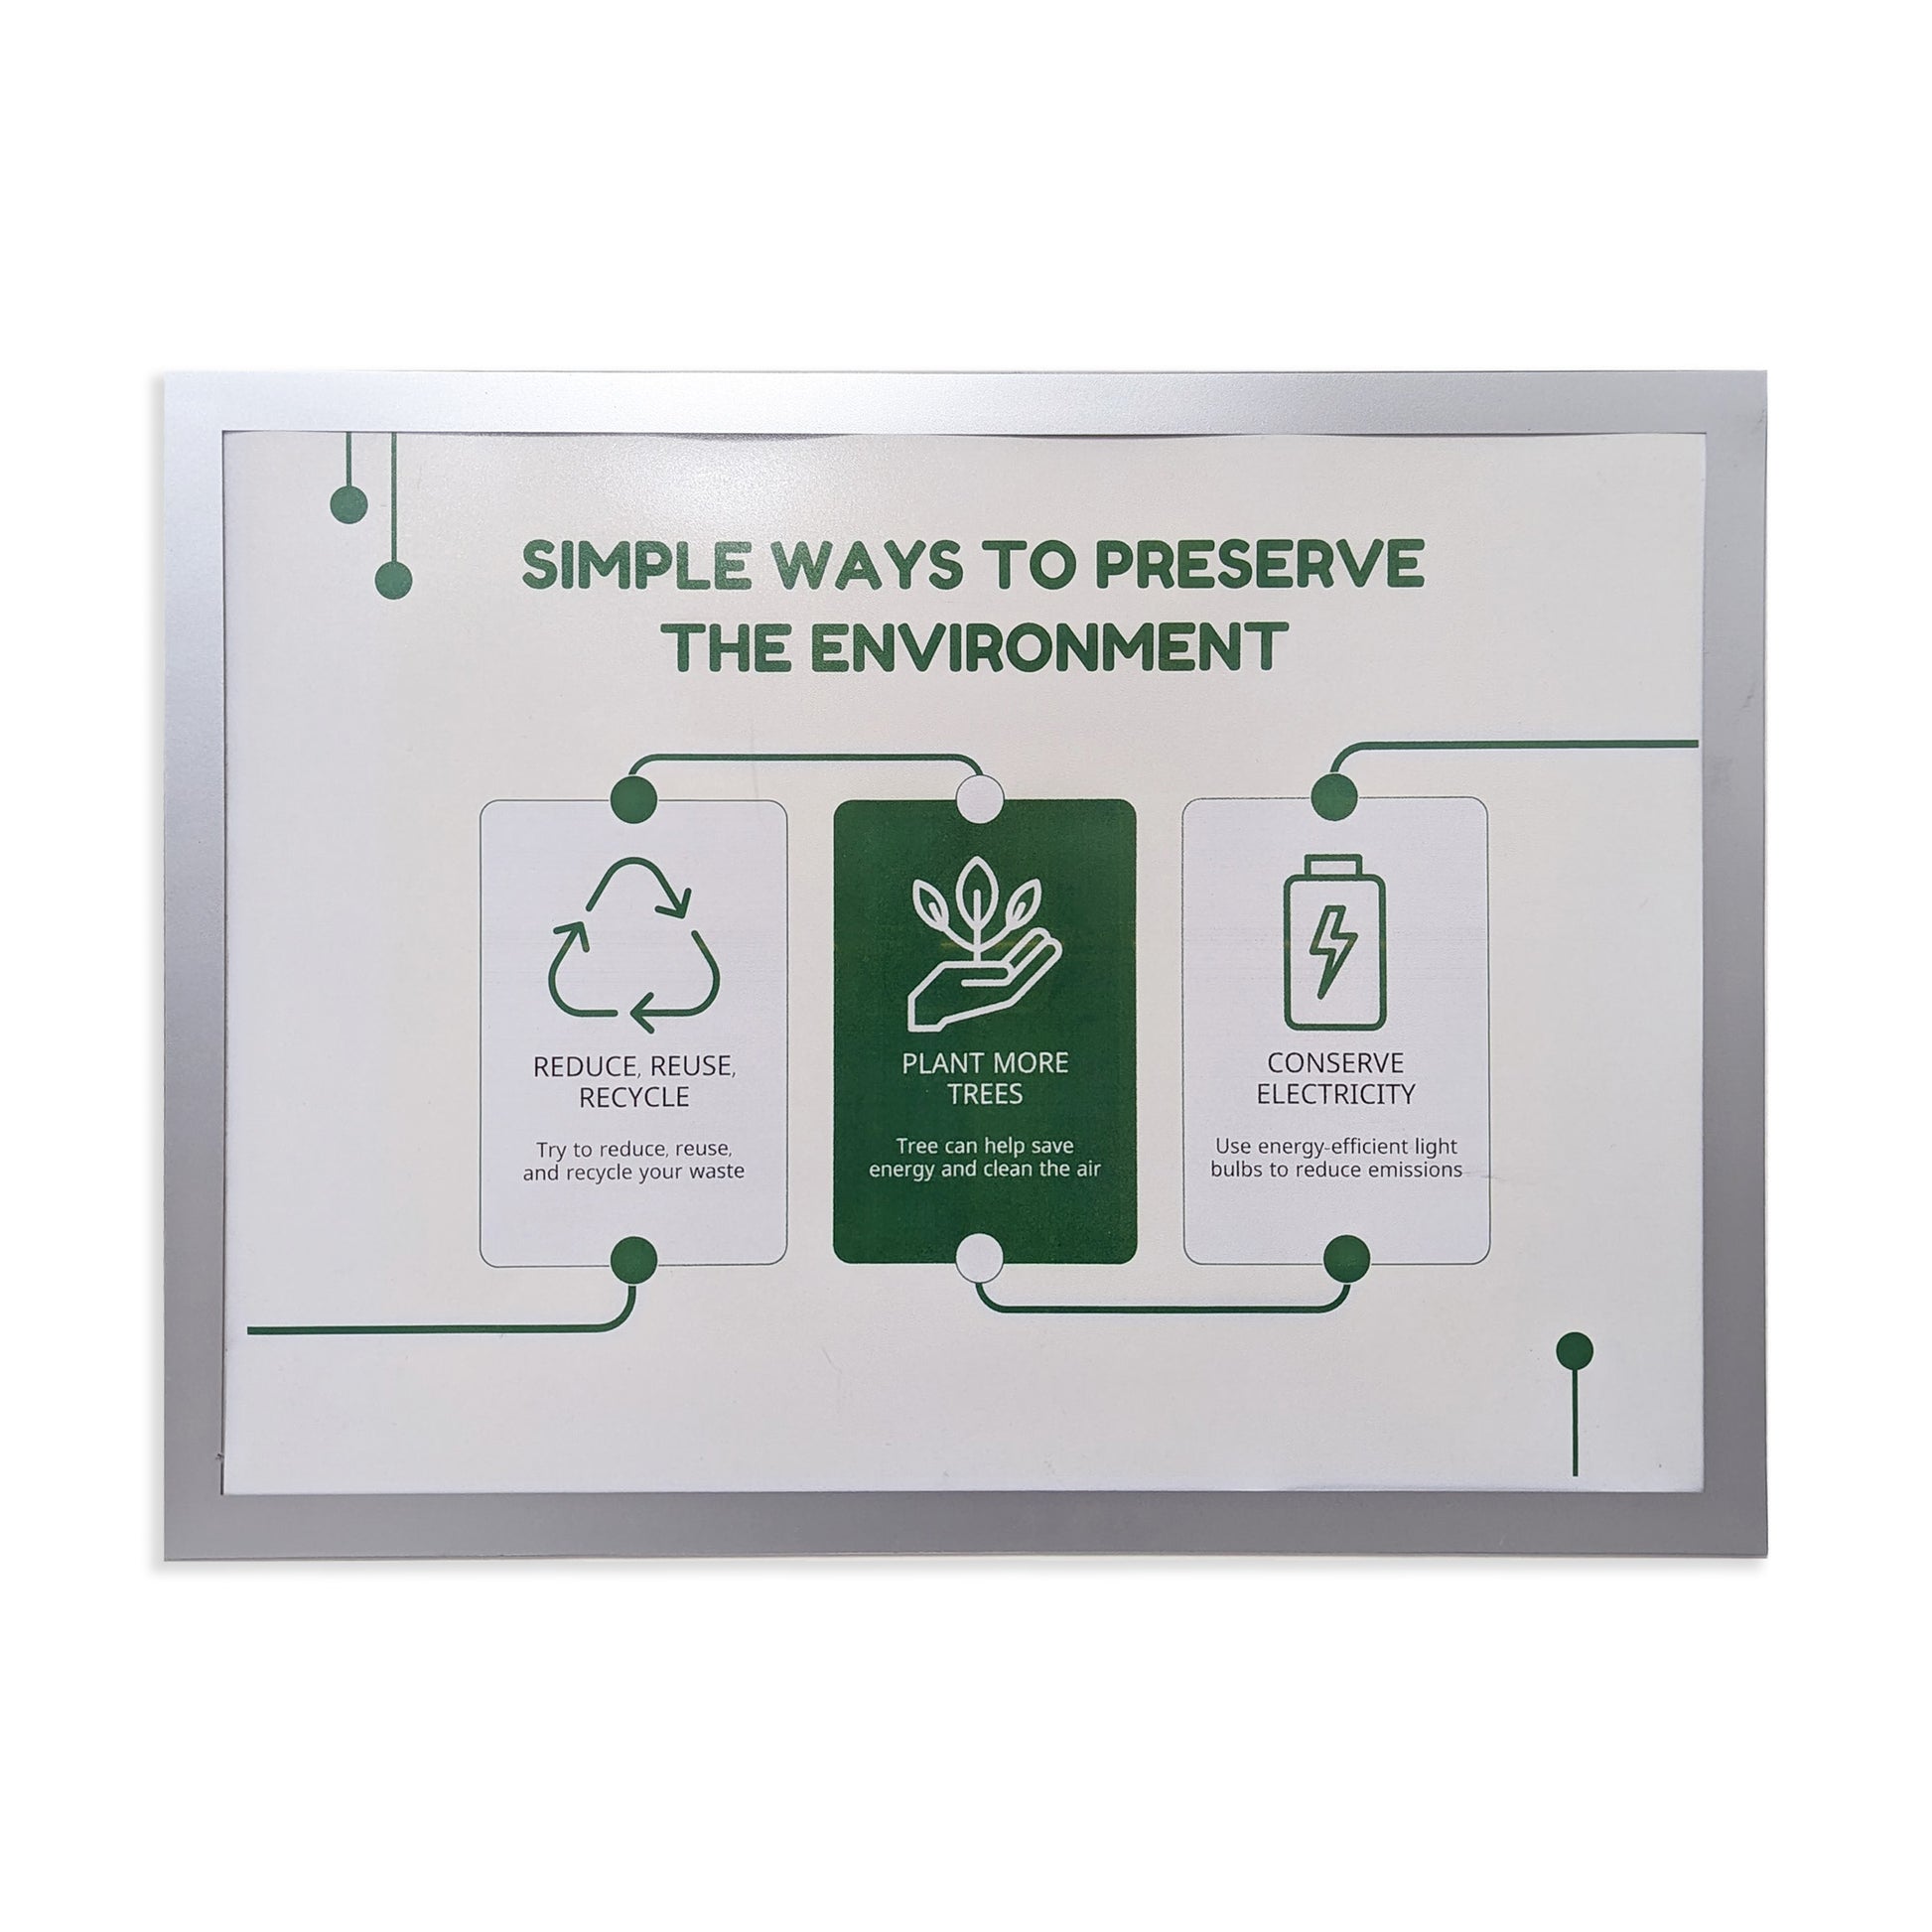 An A3 self-adhesive magnetic display frame mounted on a wall, containing a poster titled 'SIMPLE WAYS TO PRESERVE THE ENVIRONMENT', with icons and tips for reducing waste, planting trees, and conserving electricity.